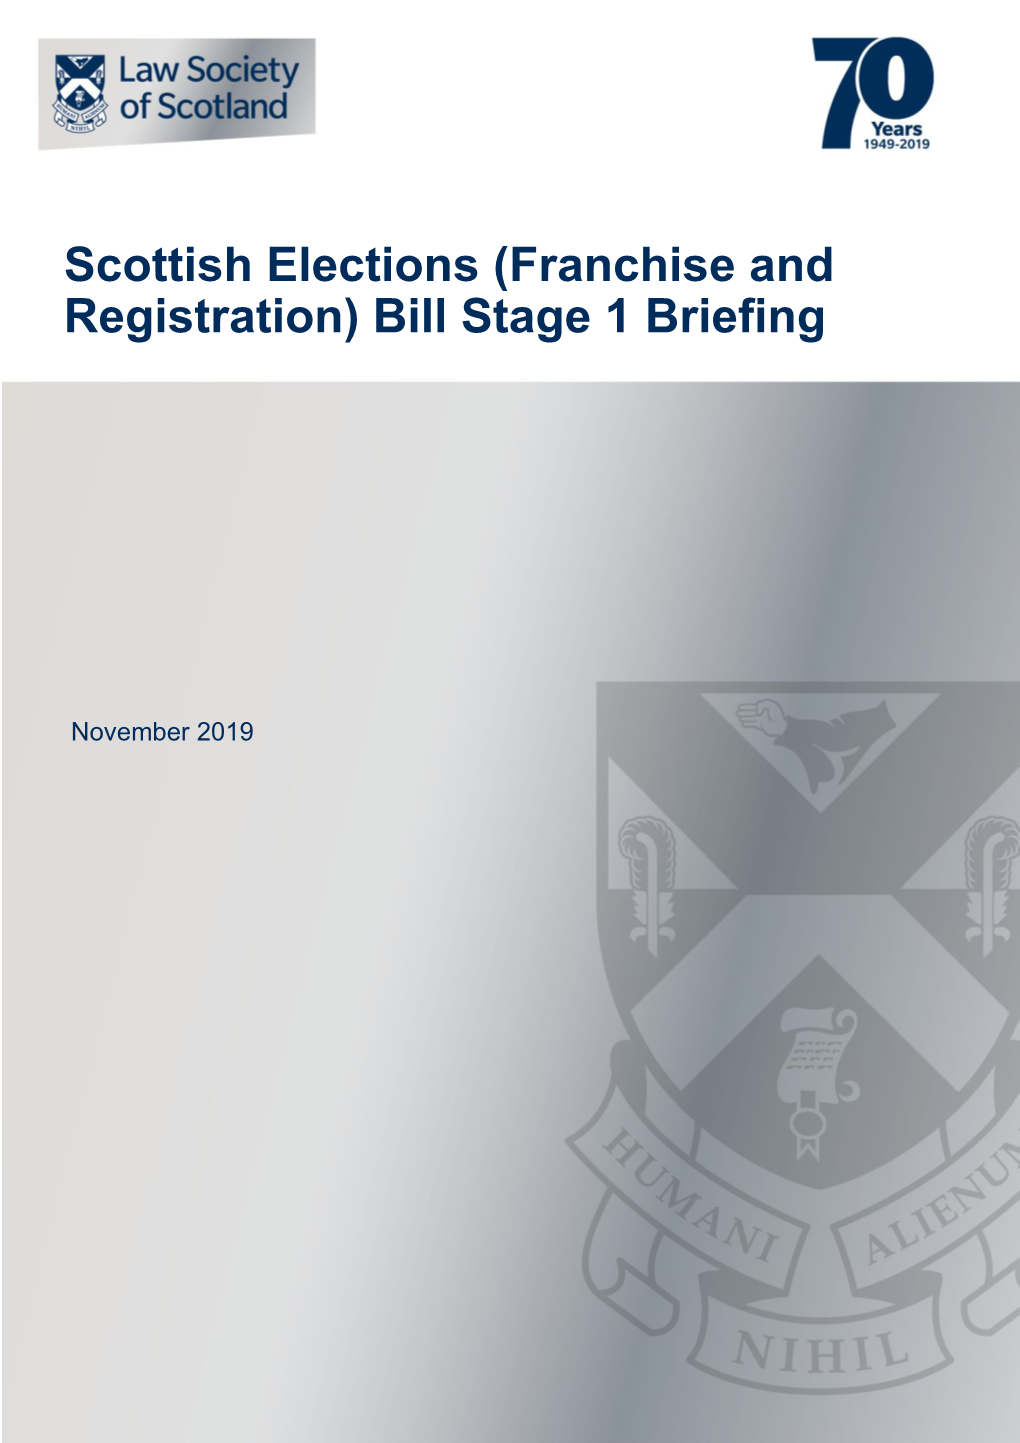 Scottish Elections (Franchise and Registration) Bill Stage 1 Briefing